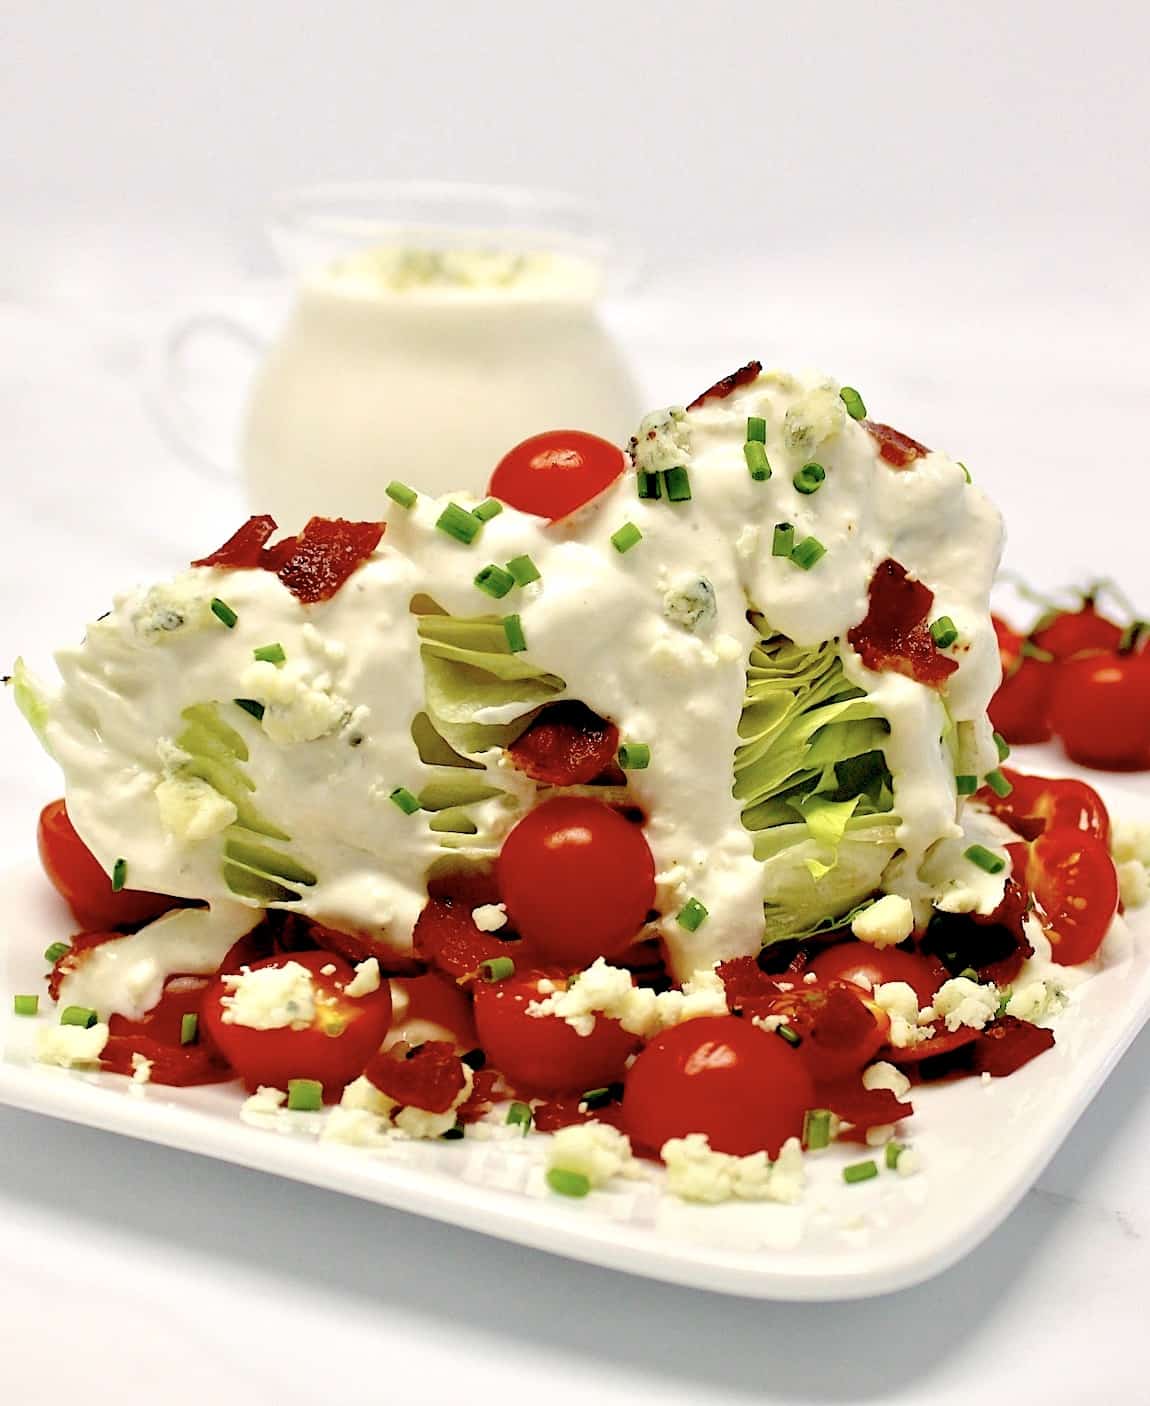 Classic Wedge Salad with blue cheese dressing in background